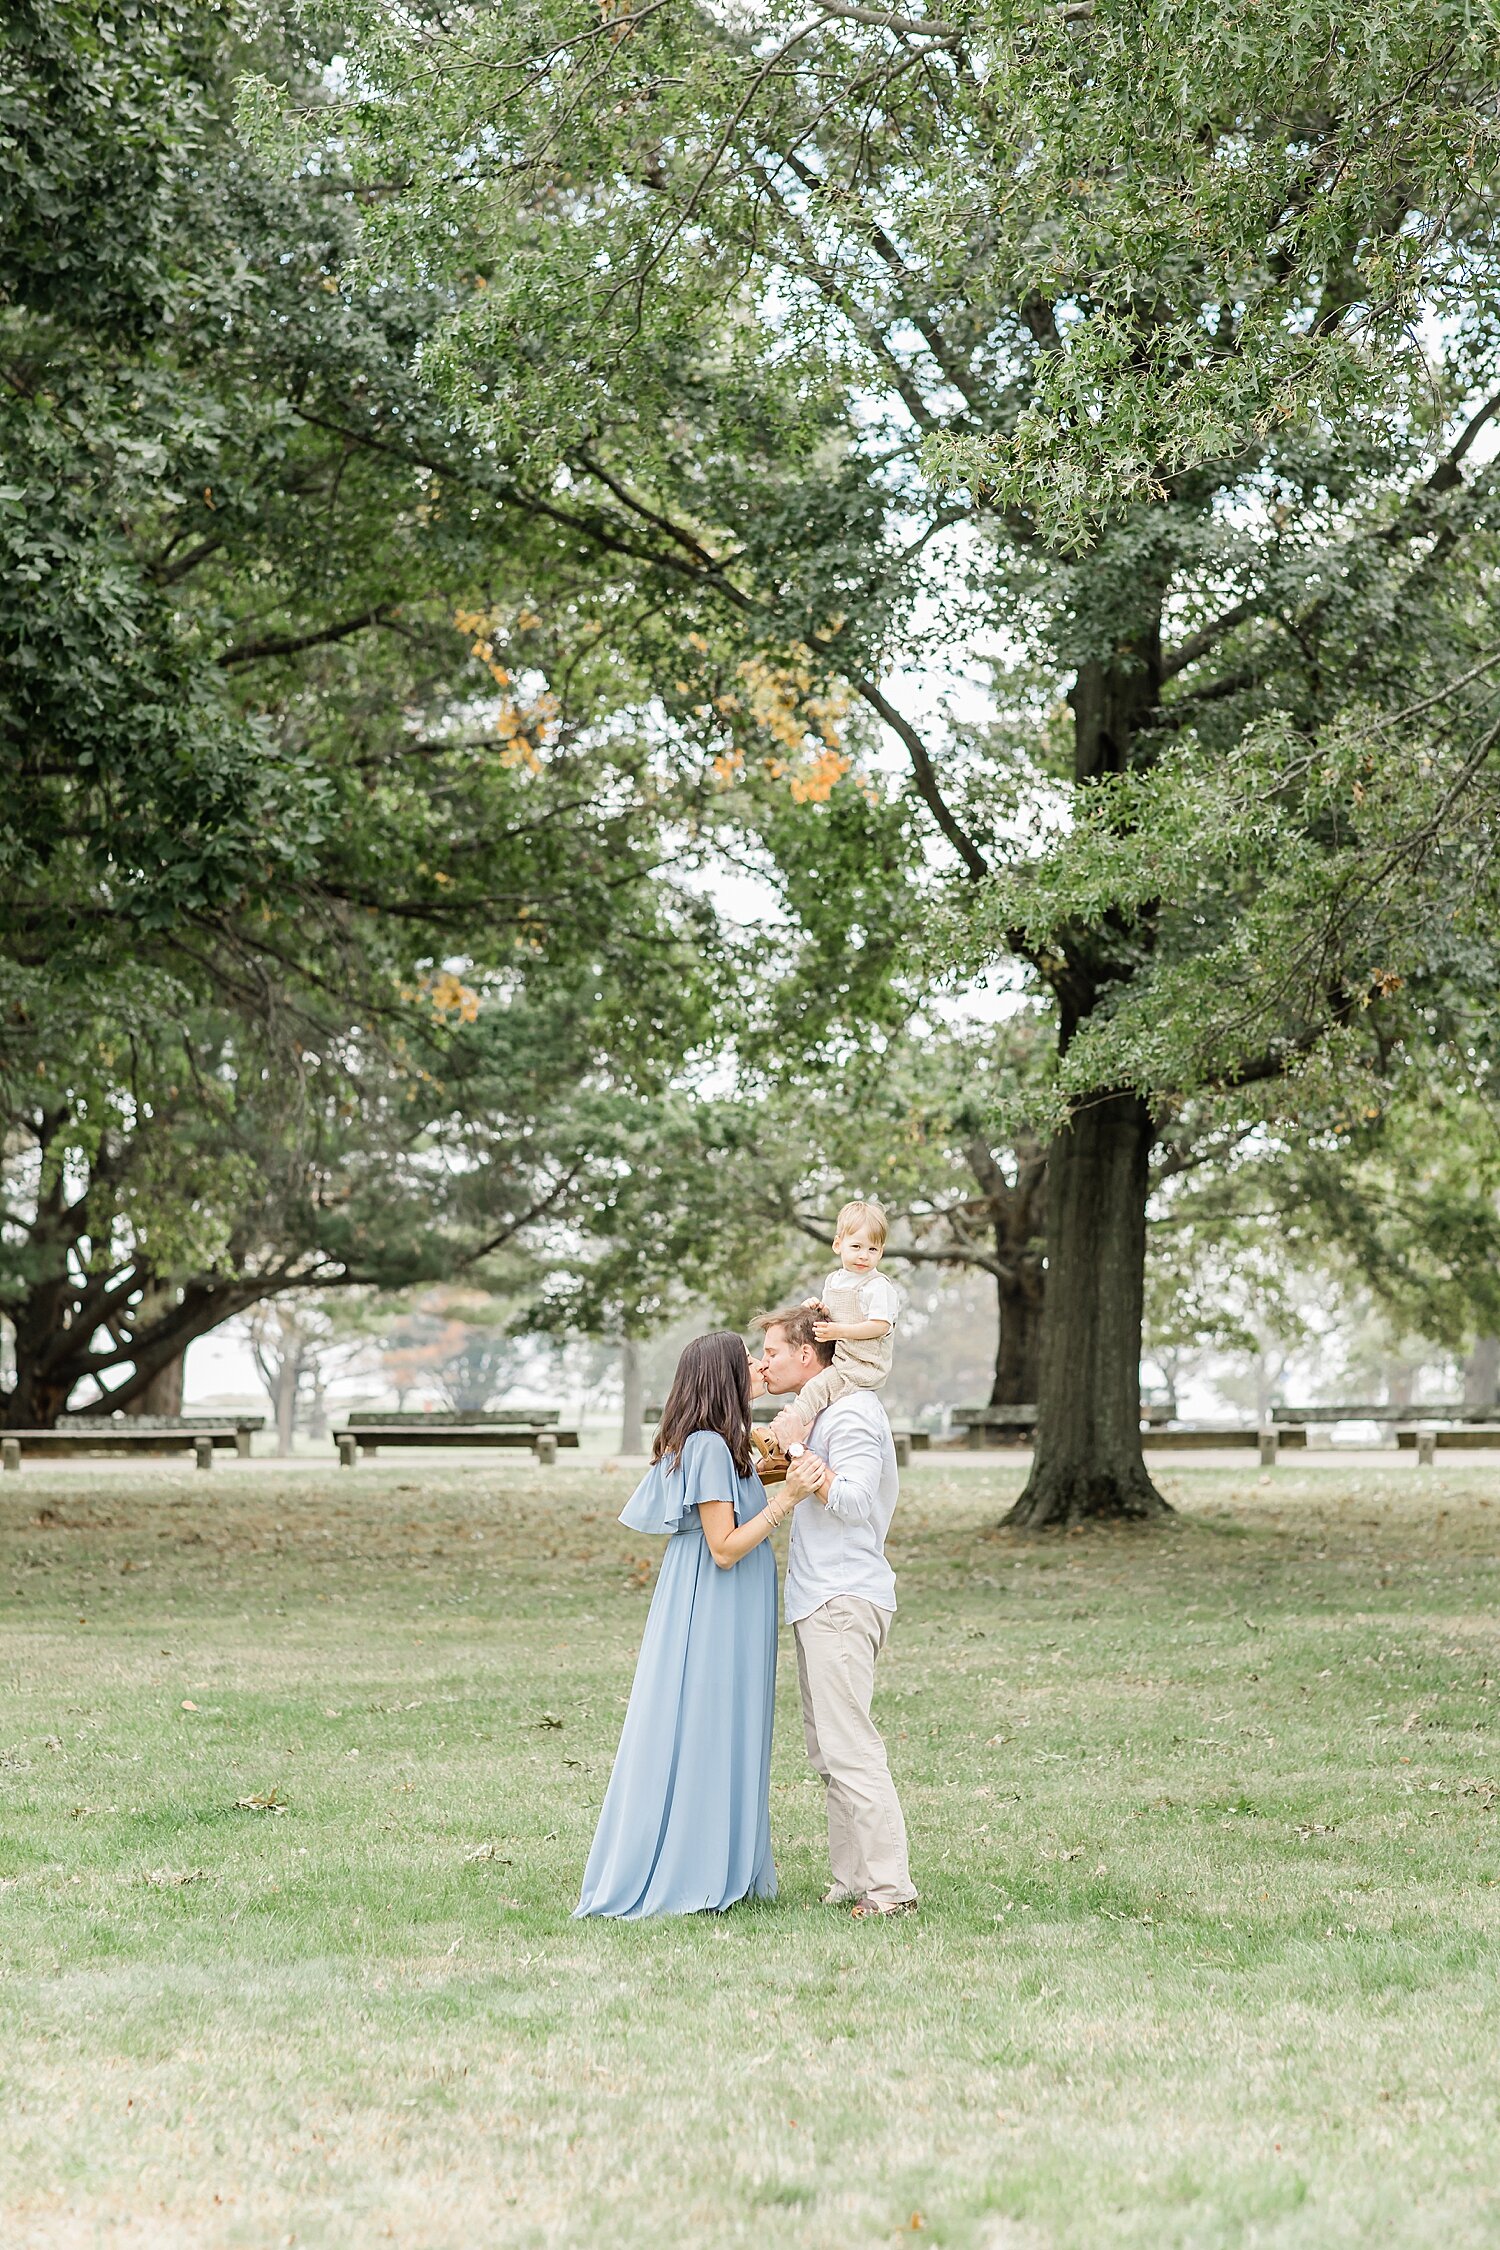 Family photo in field under big tree at Sherwood Island Park. Photos by Kristin Wood Photography.